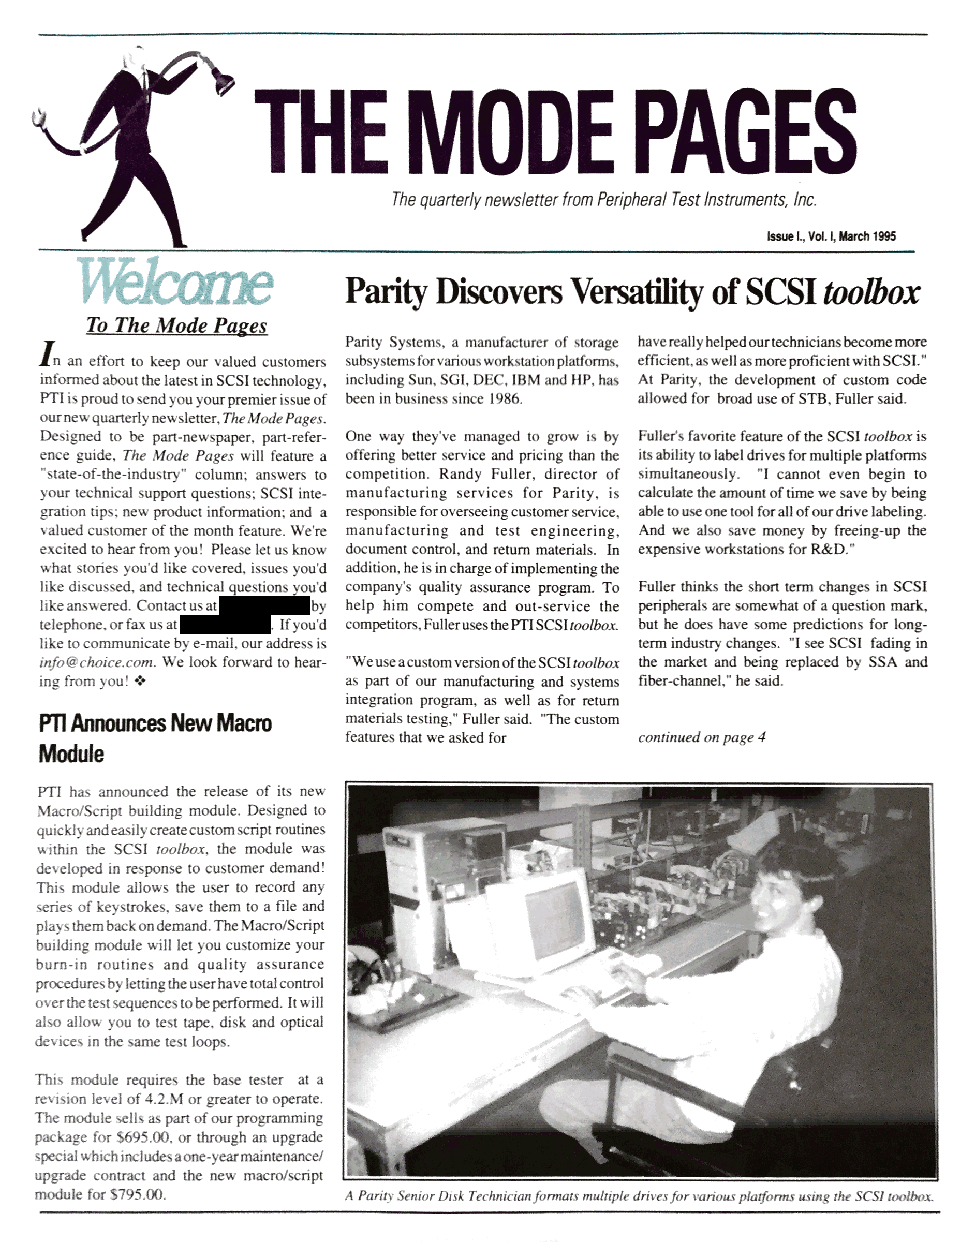 themodepages1995vol1pg1